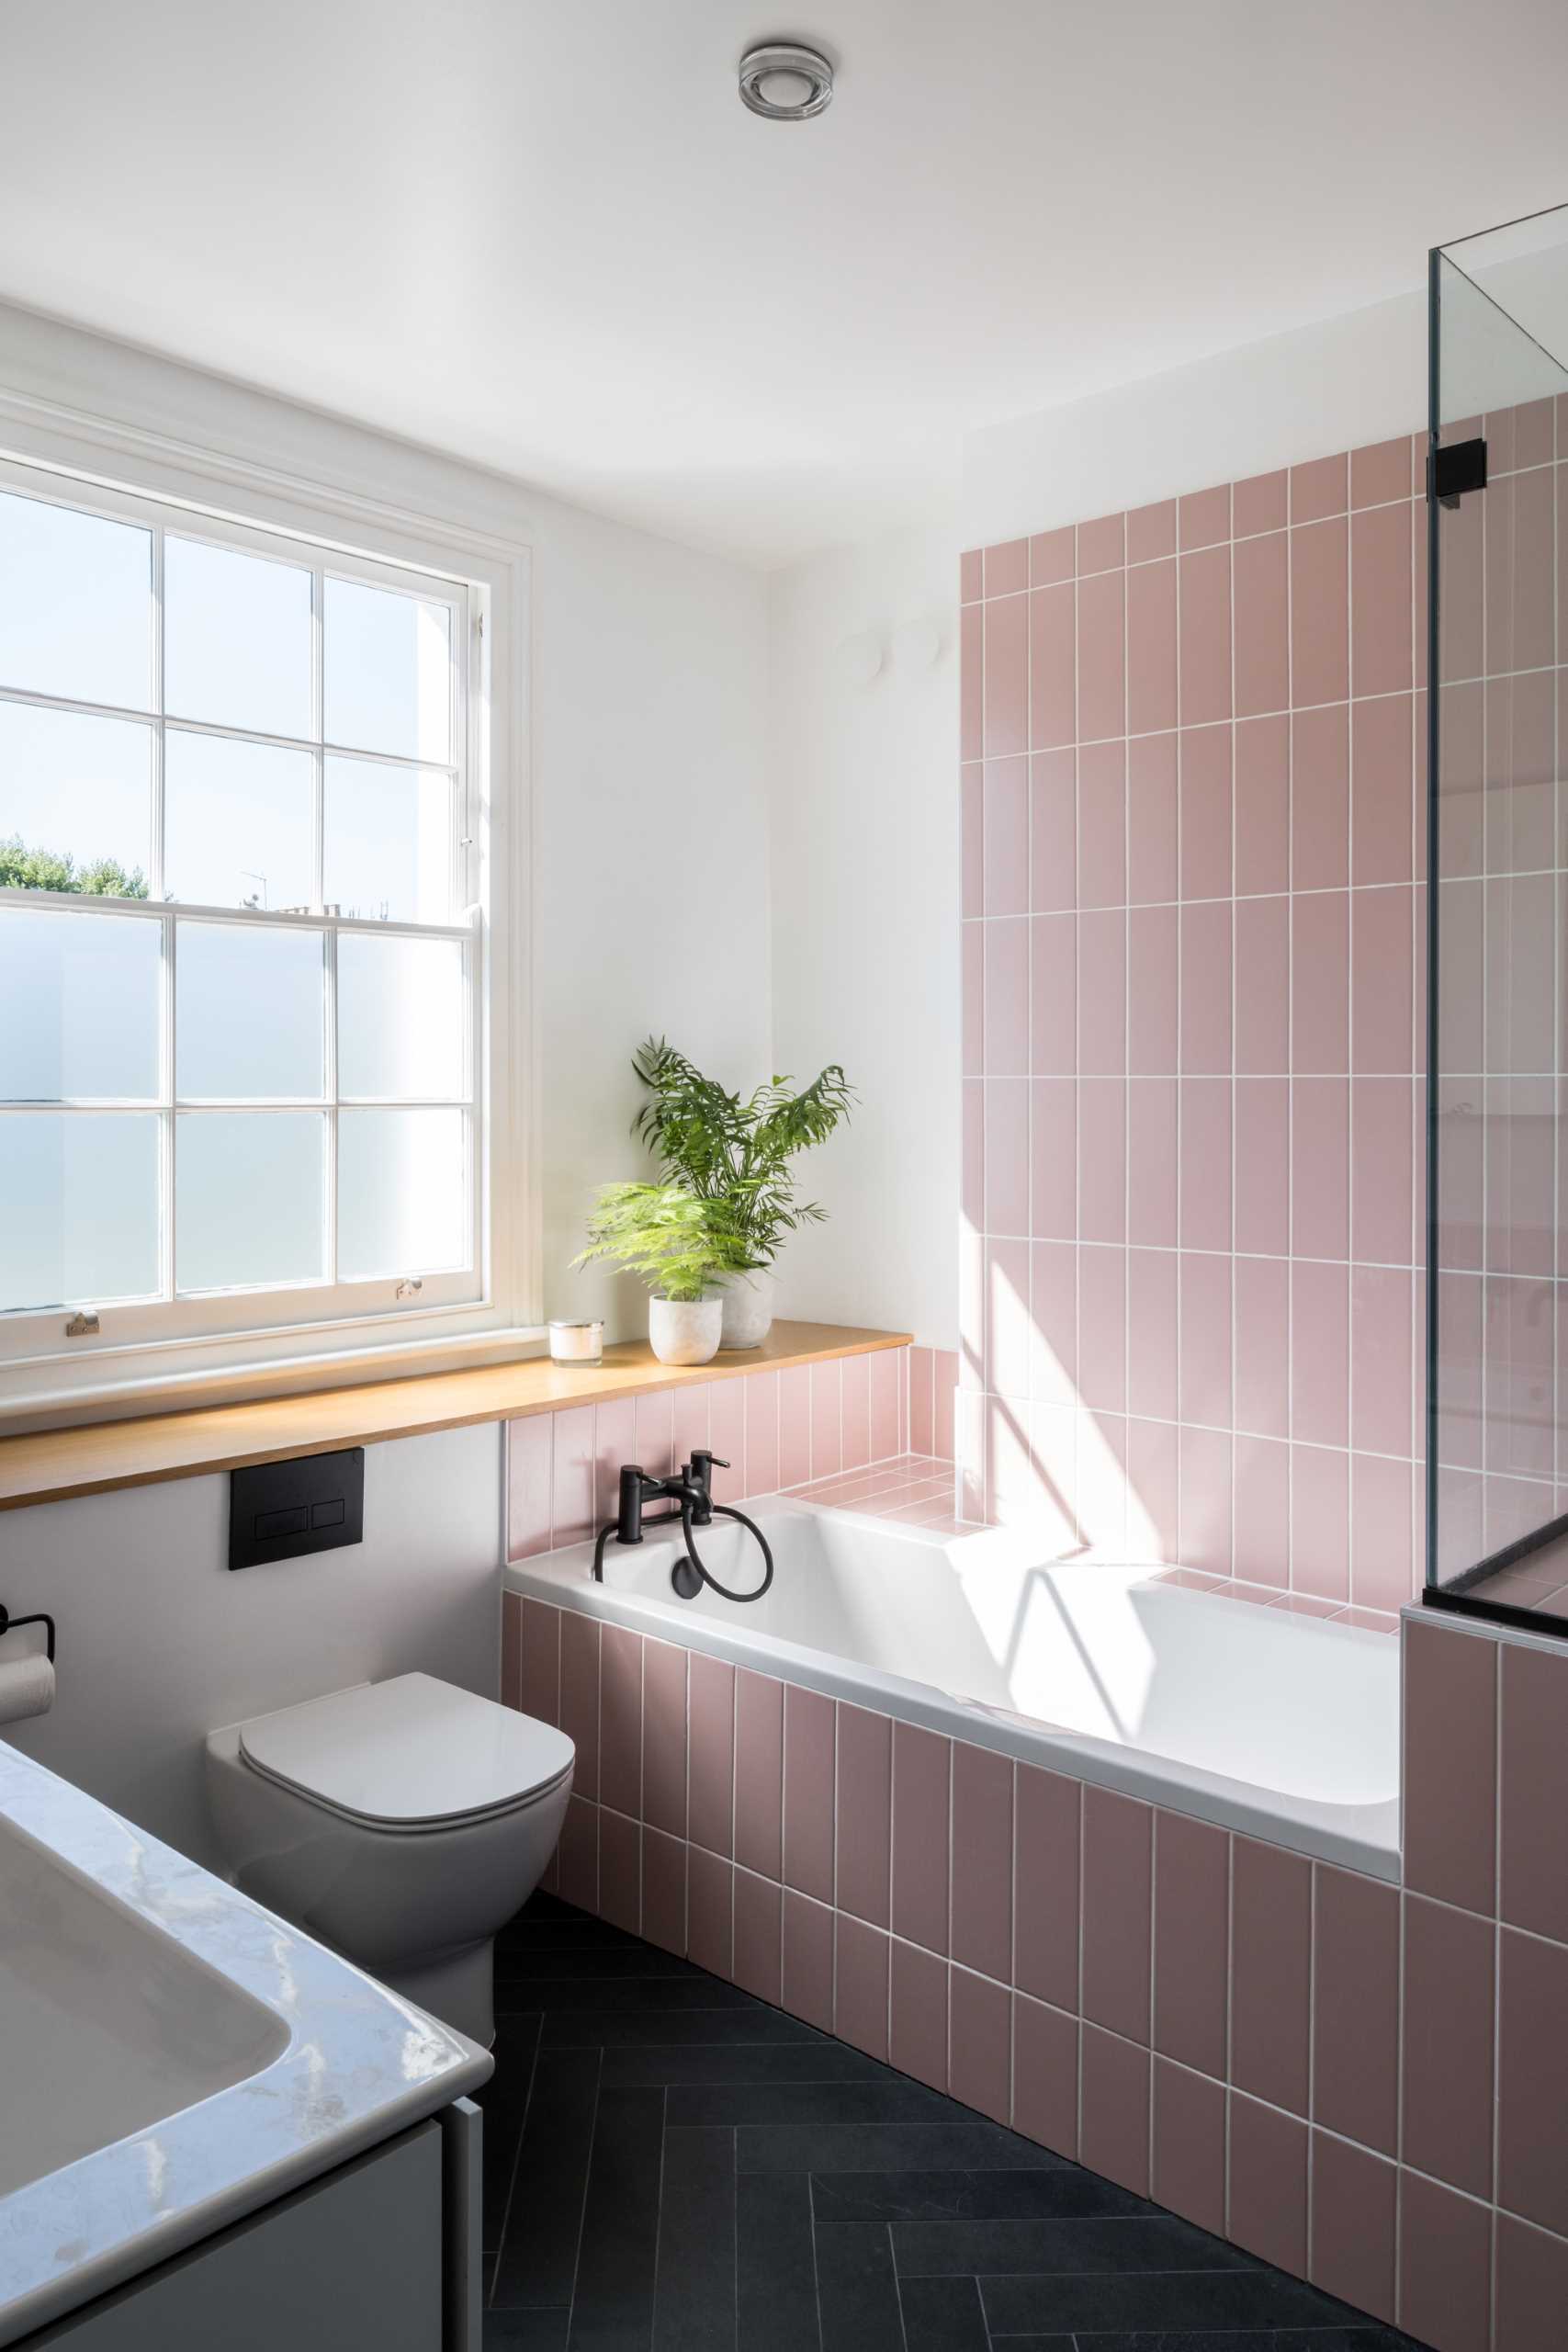 In this bathroom, pink subway tiles in a vertical layout cover the shower wall and the bathtub surround.